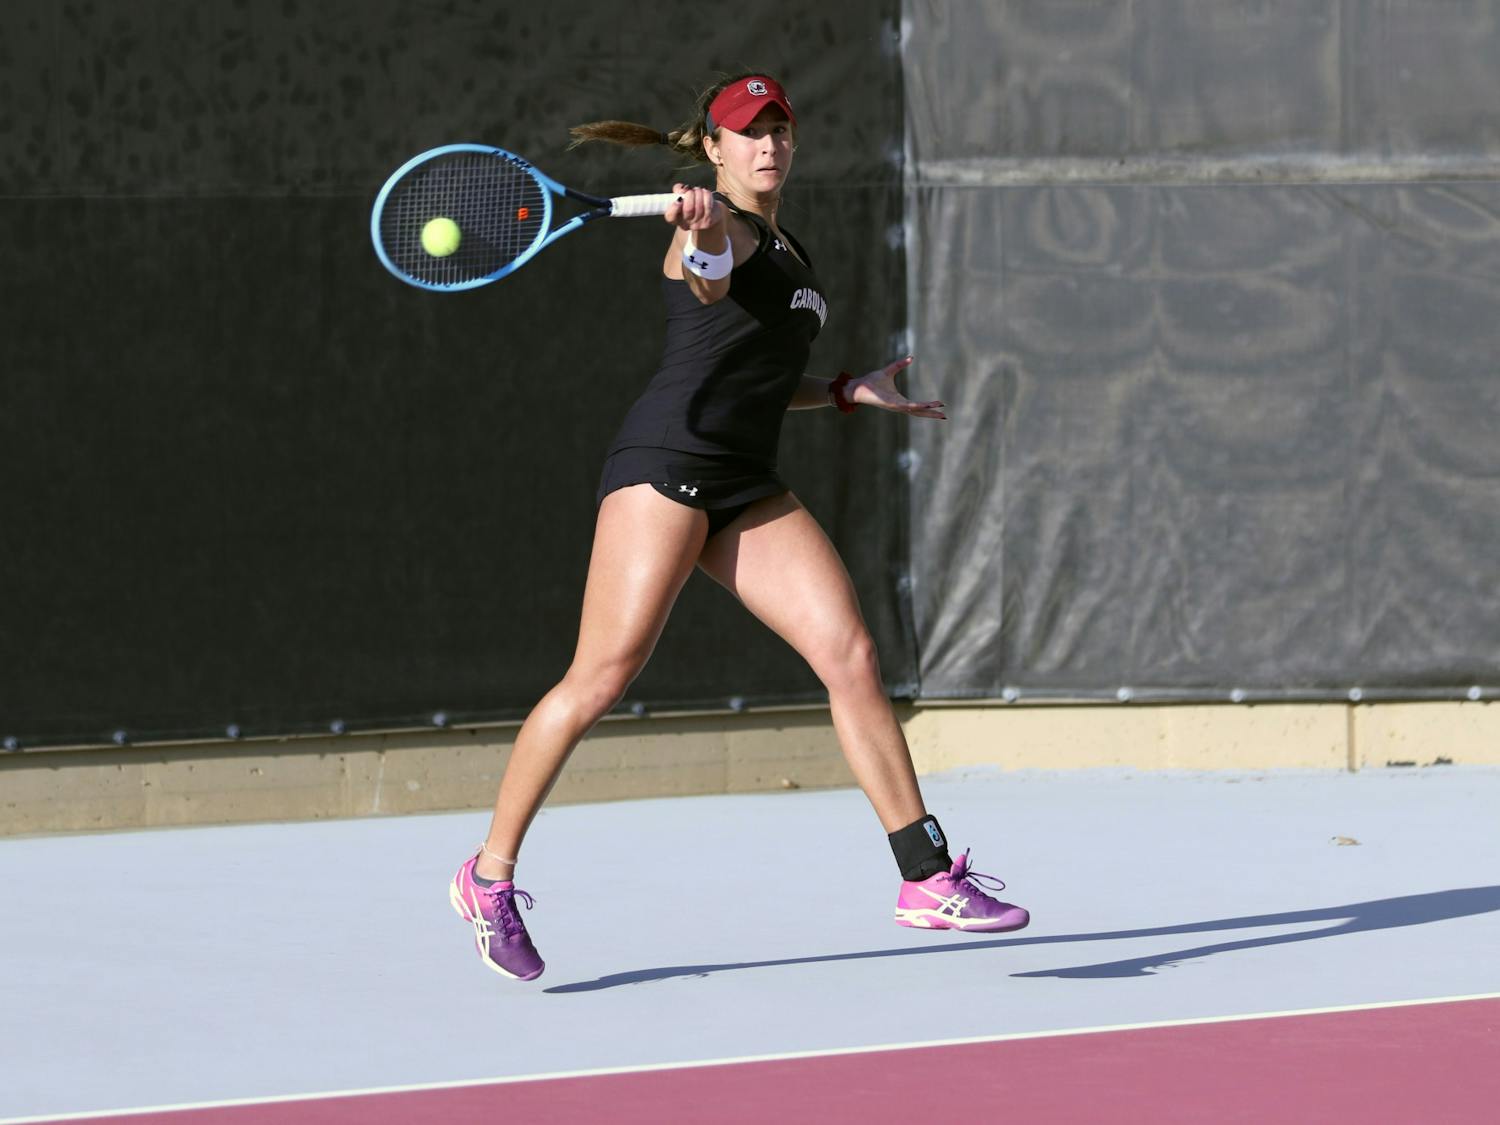 Freshman Gabriela Martinez hits a forehand during her match against Clemson on Jan. 30, 2020. Martinez came out with the win in a tiebreaker. South Carolina defeated Clemson 6-1.